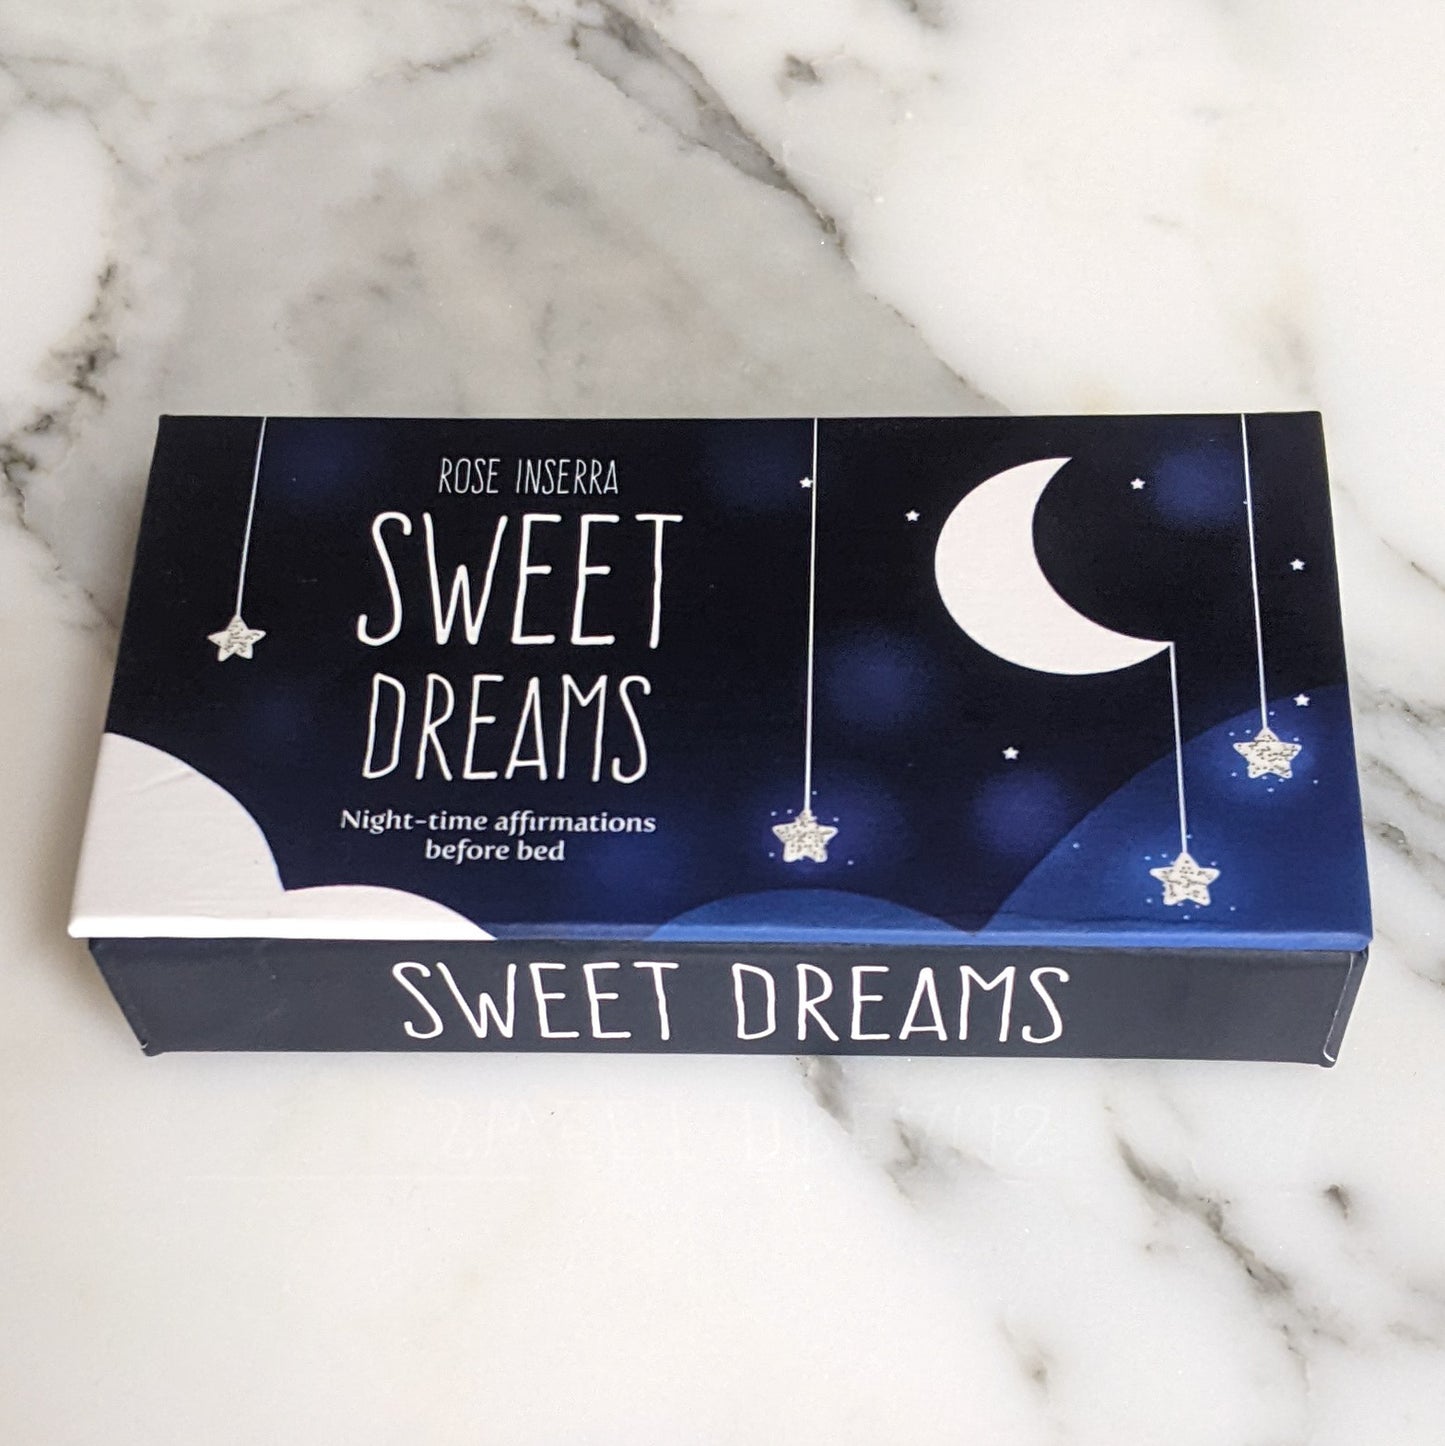 Sweet Dreams Card Deck (Night-time affirmations before bed)